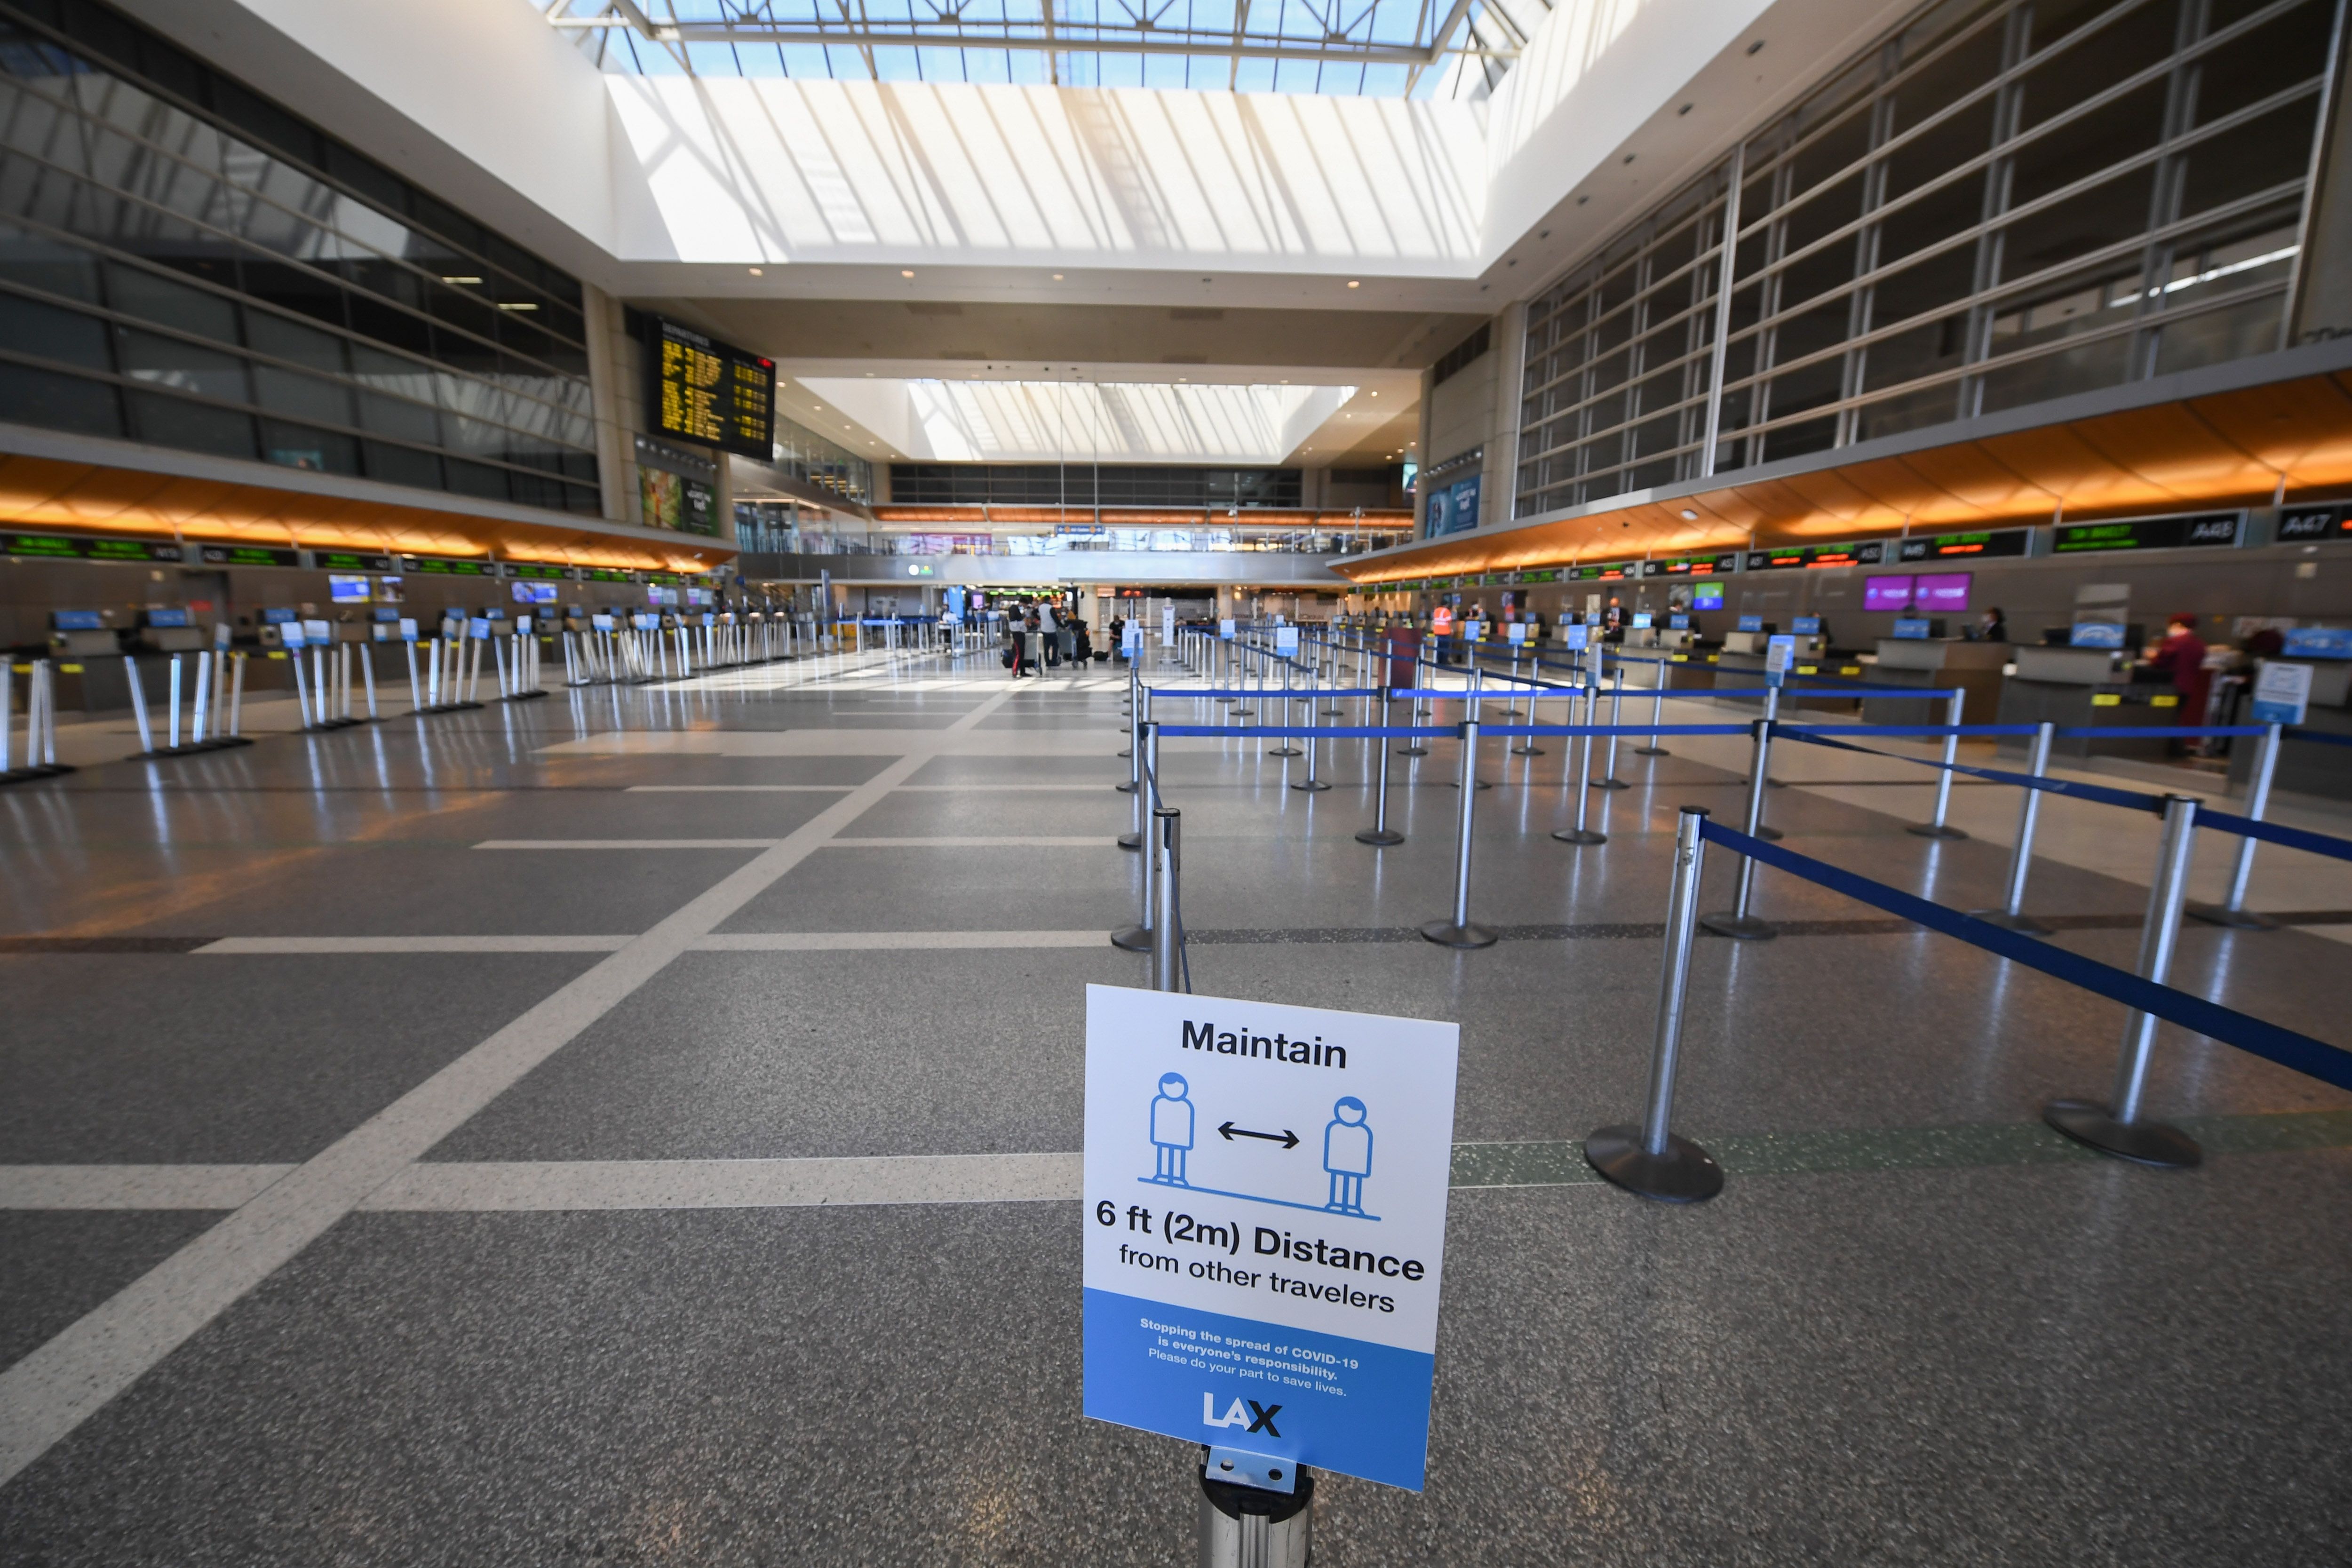 A sign advises travelers to respect social distancing at a largely empty Tom Bradley International Terminal at Los Angeles International airport on August 12, 2020 in Los Angeles during the coronavirus pandemic. - On August 11, 559,420 passengers passed through T.S.A. security checks, compared with just over 2.3 million passengers on the same day one year ago. At the same time the August 11, 2020 number is a large jump up from April 12, 2020 when only 90,510 passengers traveled out of US airports, according to U.S. Transportation Security Administration (TSA) records. (Photo by Robyn Beck / AFP) (Photo by ROBYN BECK/AFP via Getty Images)